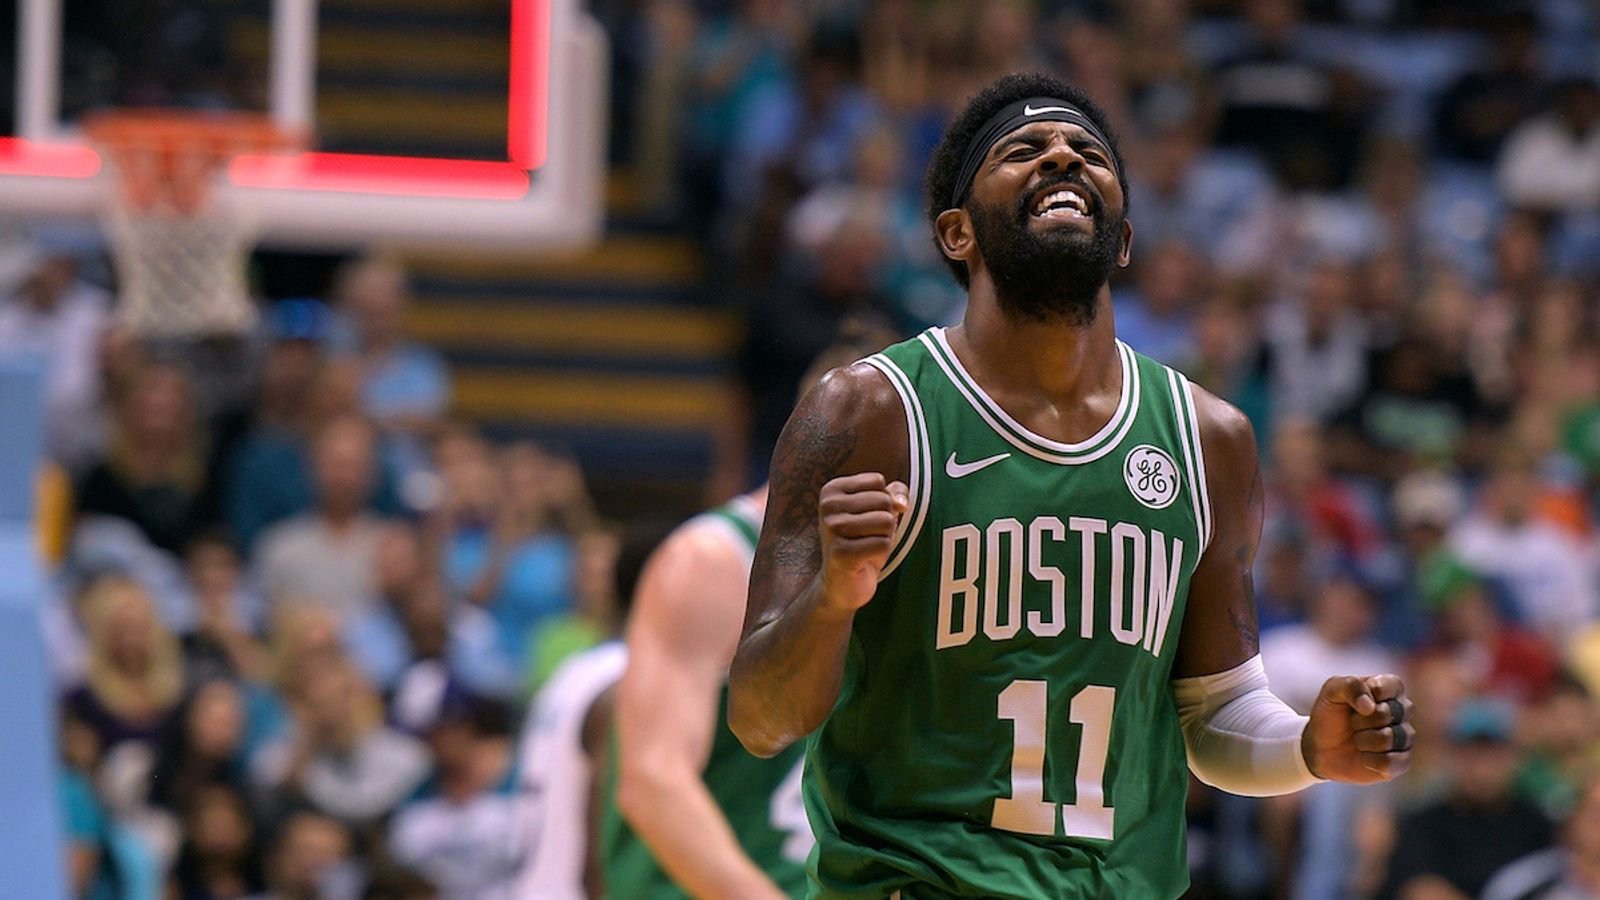 Kyrie Irving scores 55 points in unstoppable performance against